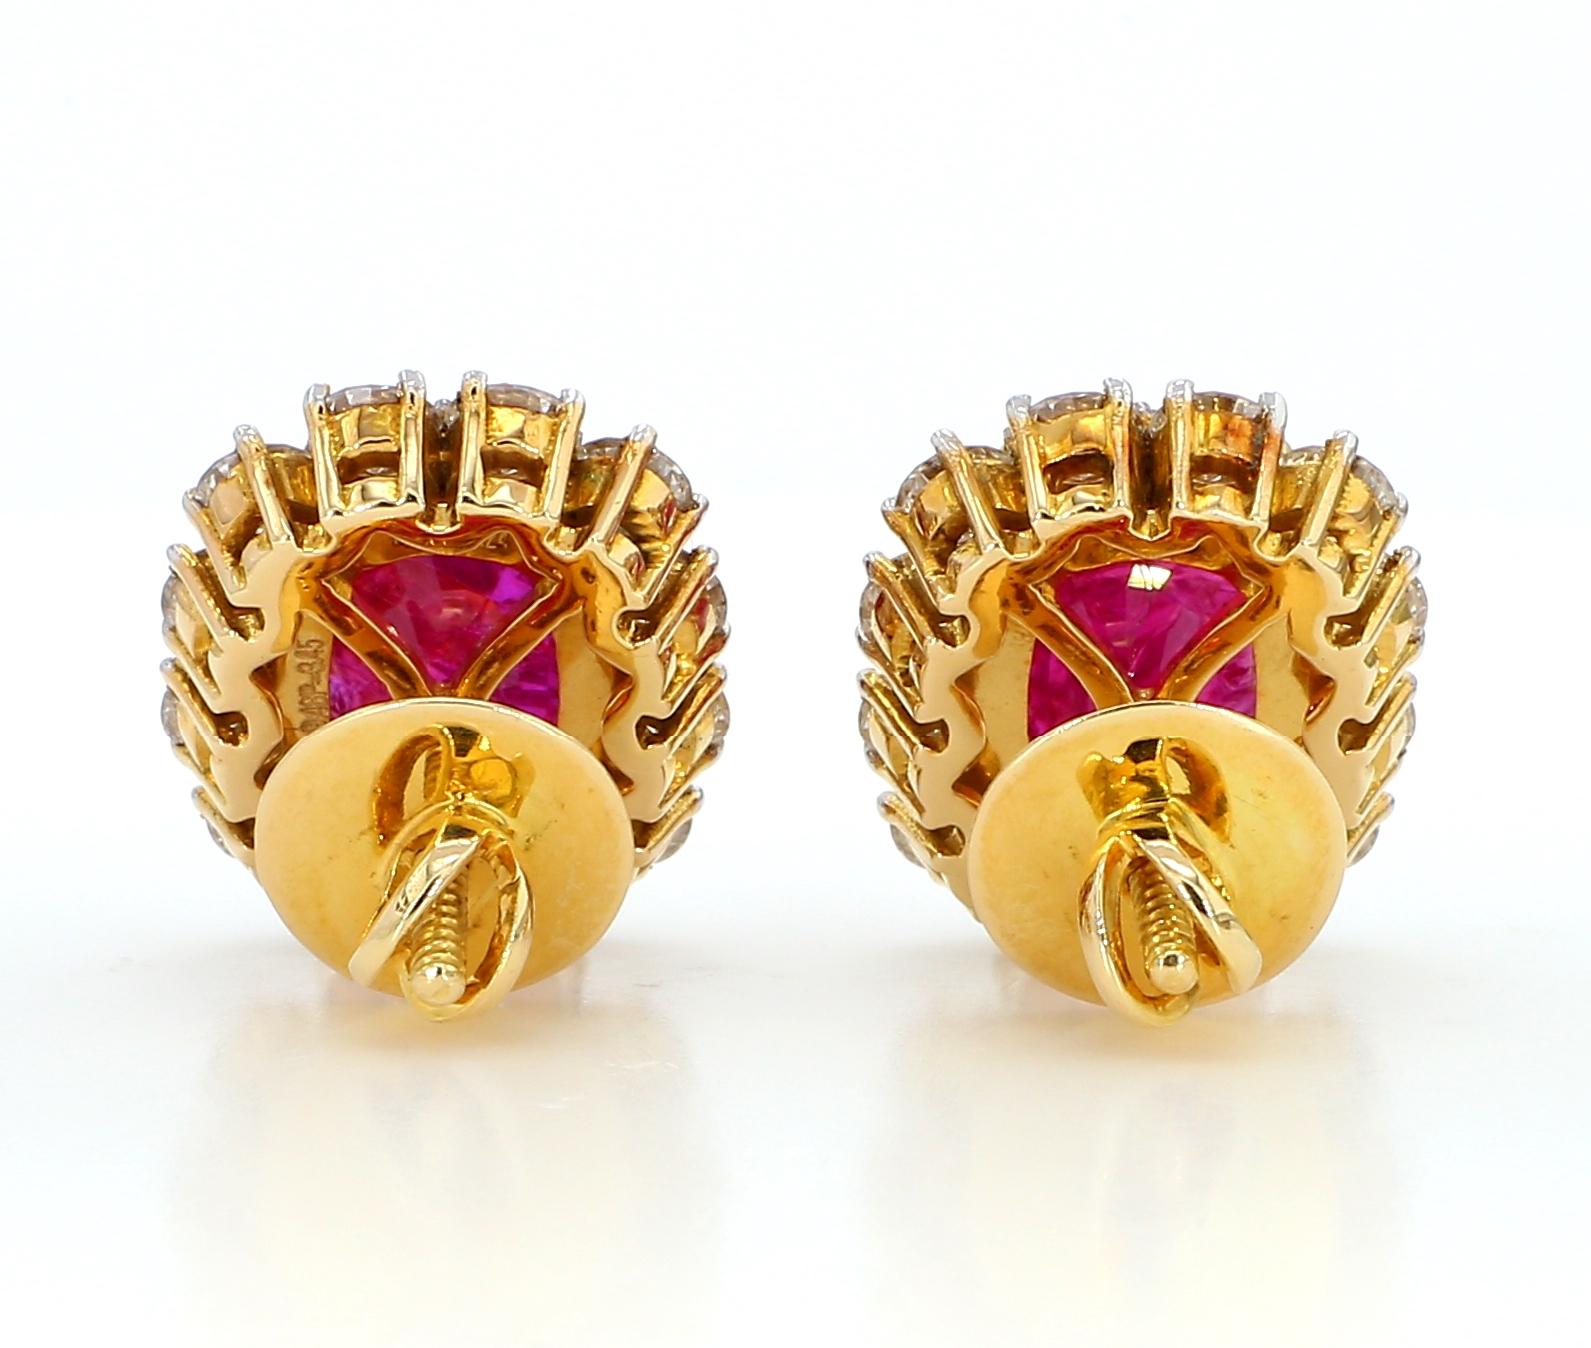 SSEF 11 Carat No Heat Natural Burmese Ruby and Diamond 18K Gold Earrings For Sale 1